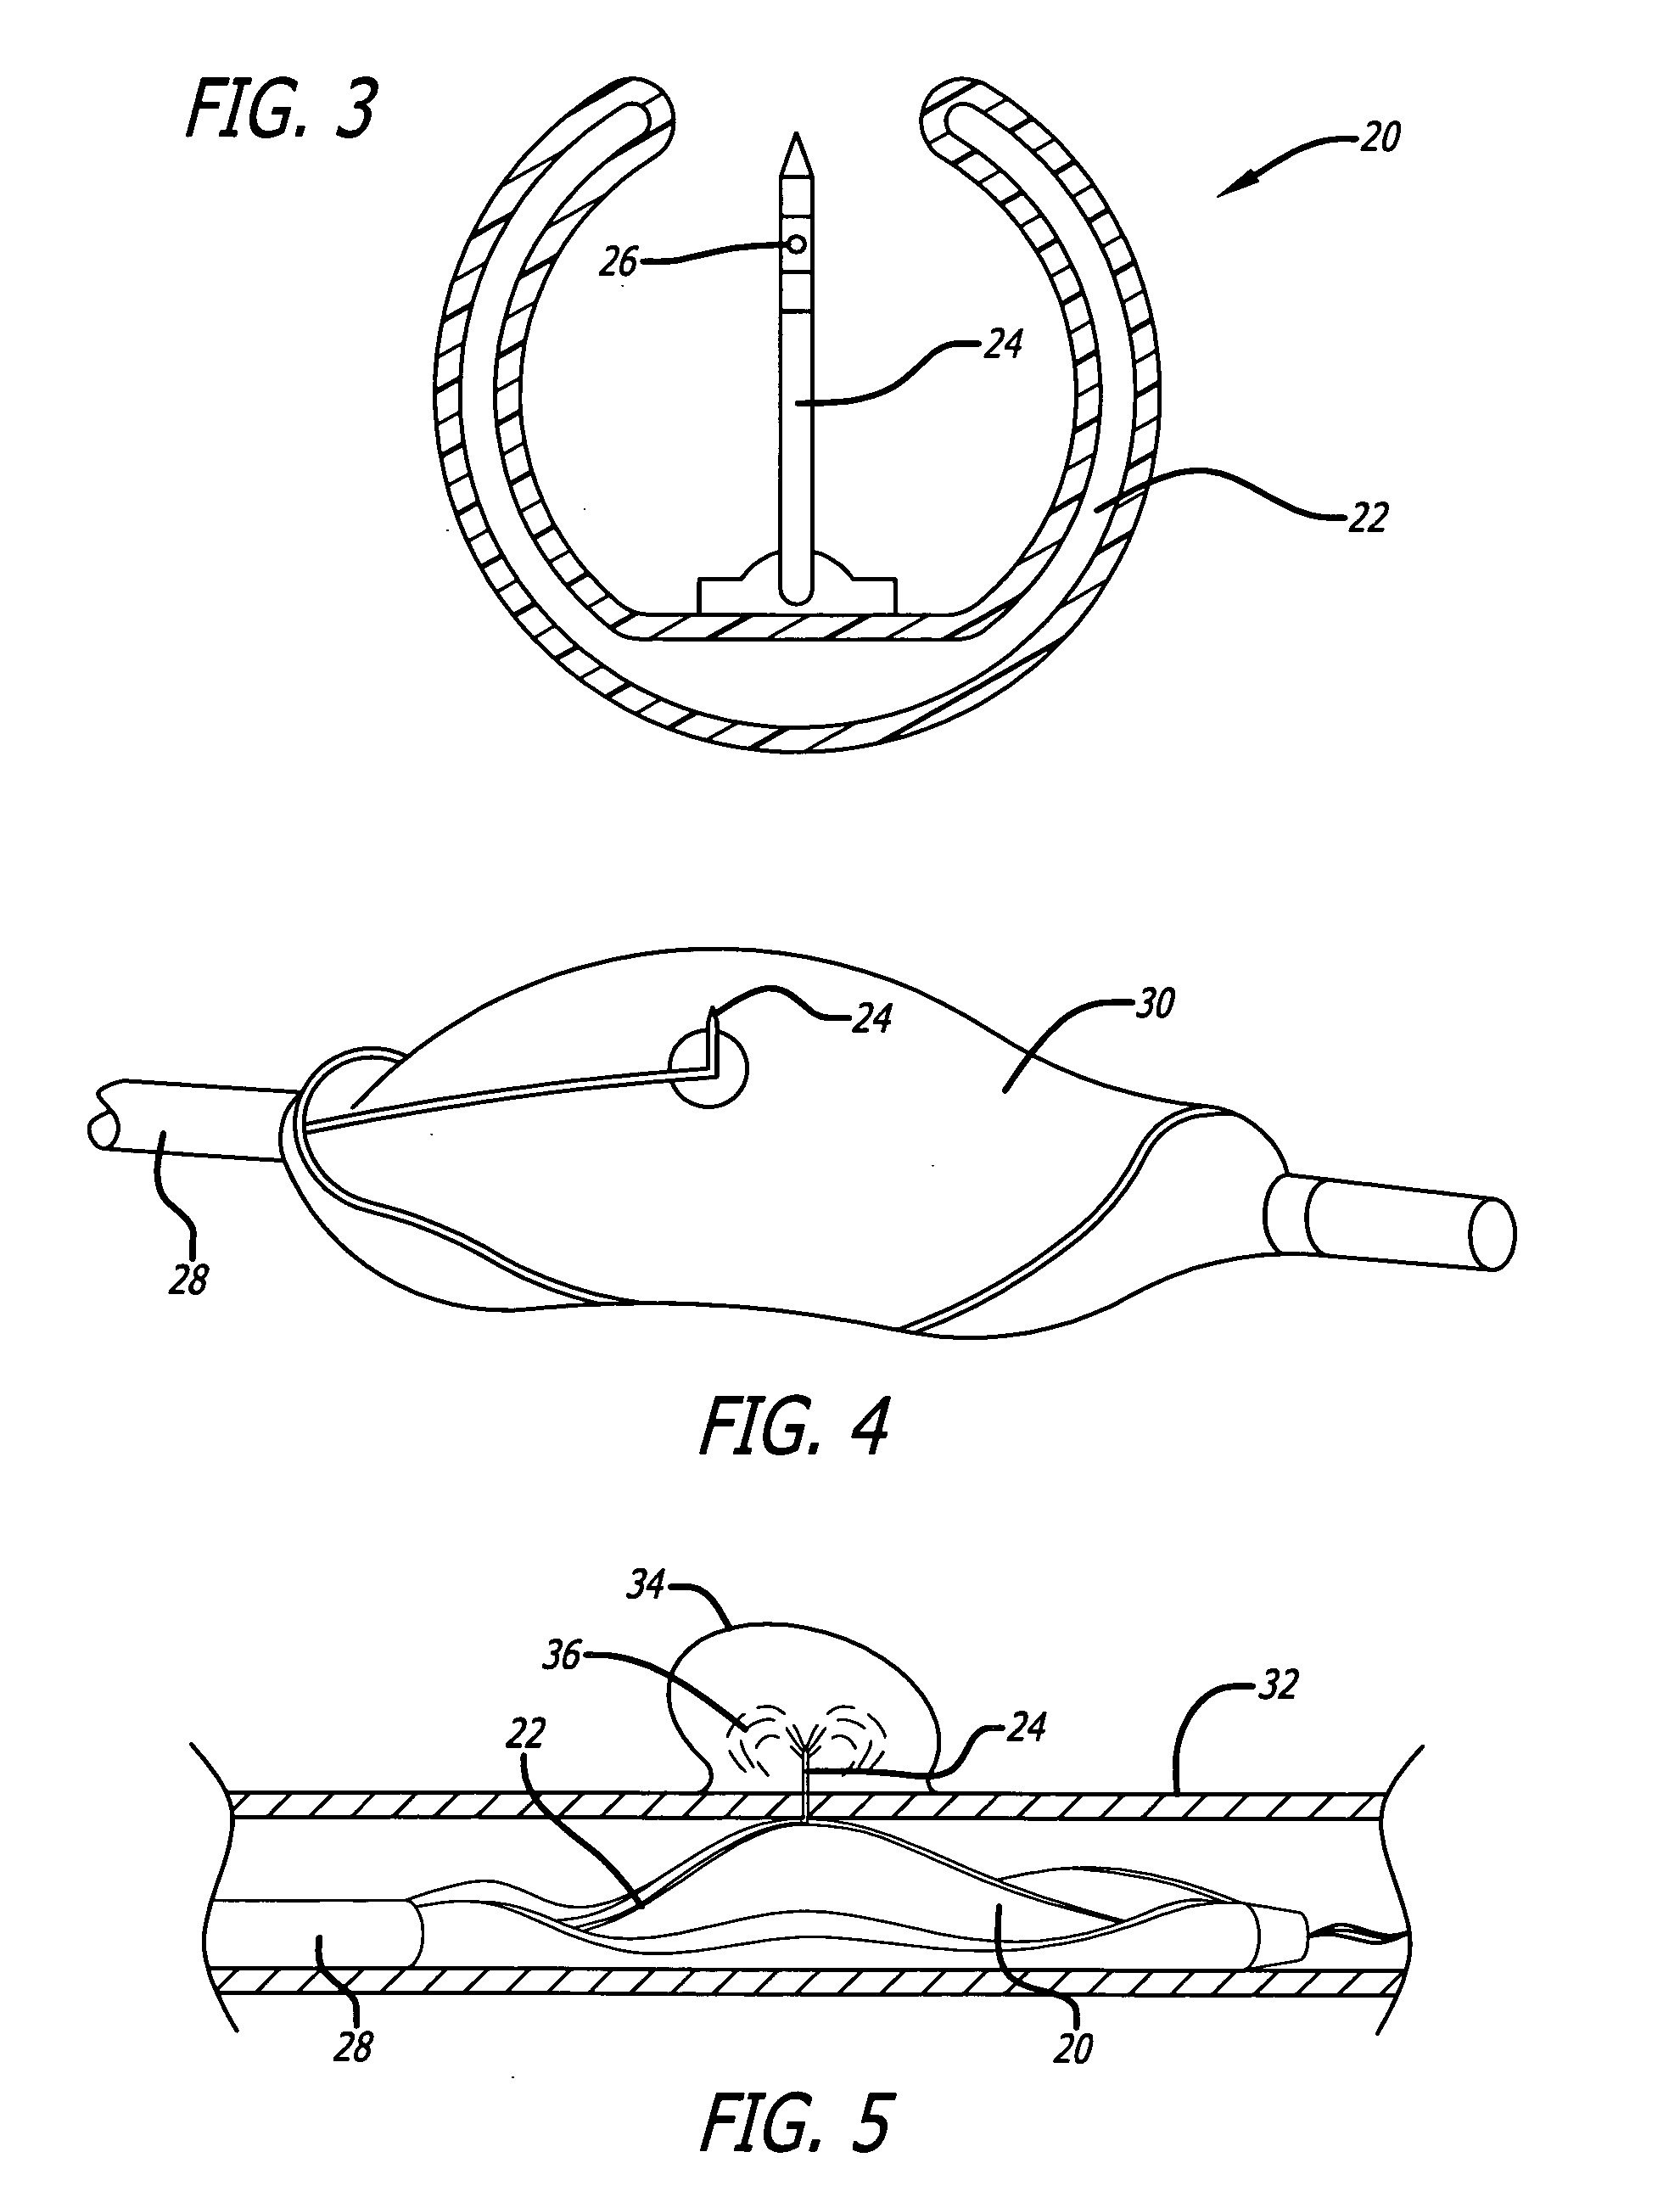 Medical devices and compositions useful for treating or inhibiting restenosis